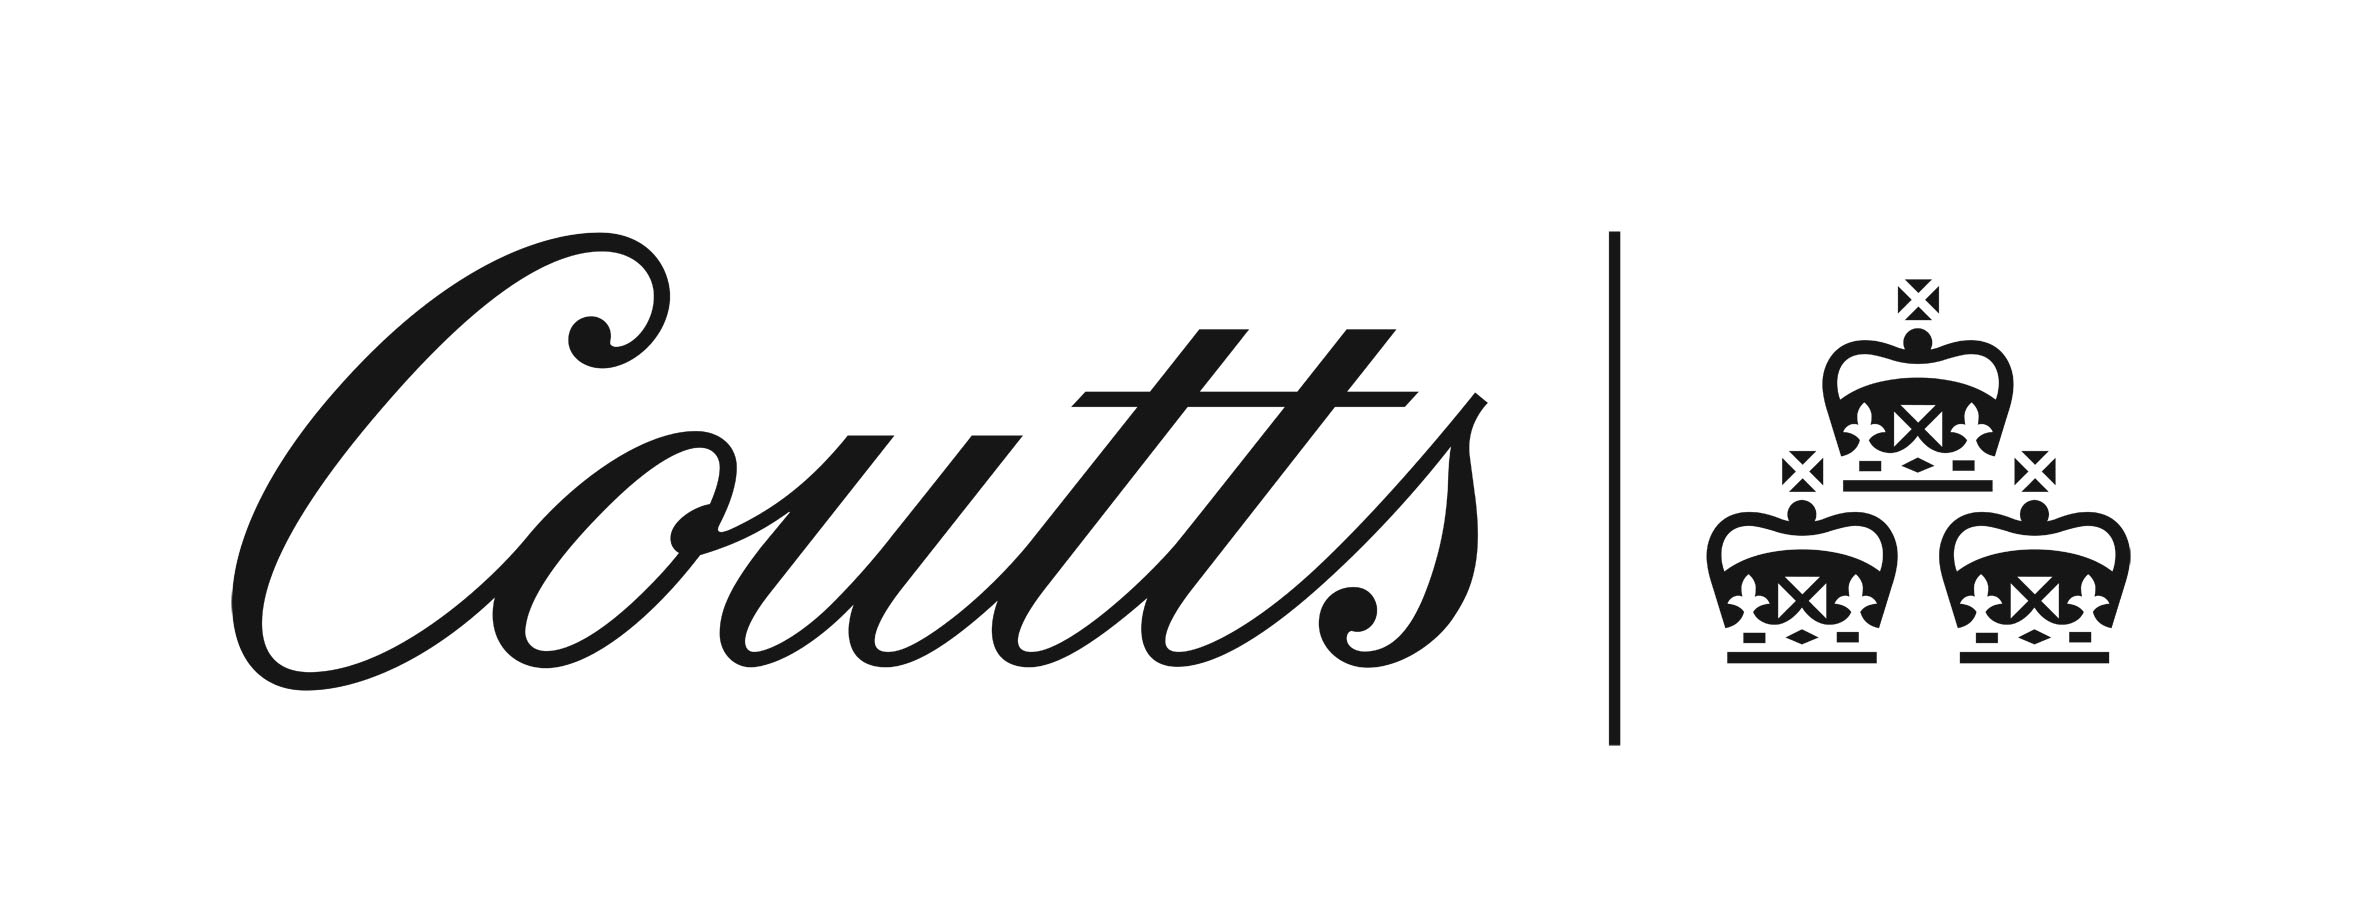 Third Coutts/eprivateclient International Family Forum held in London